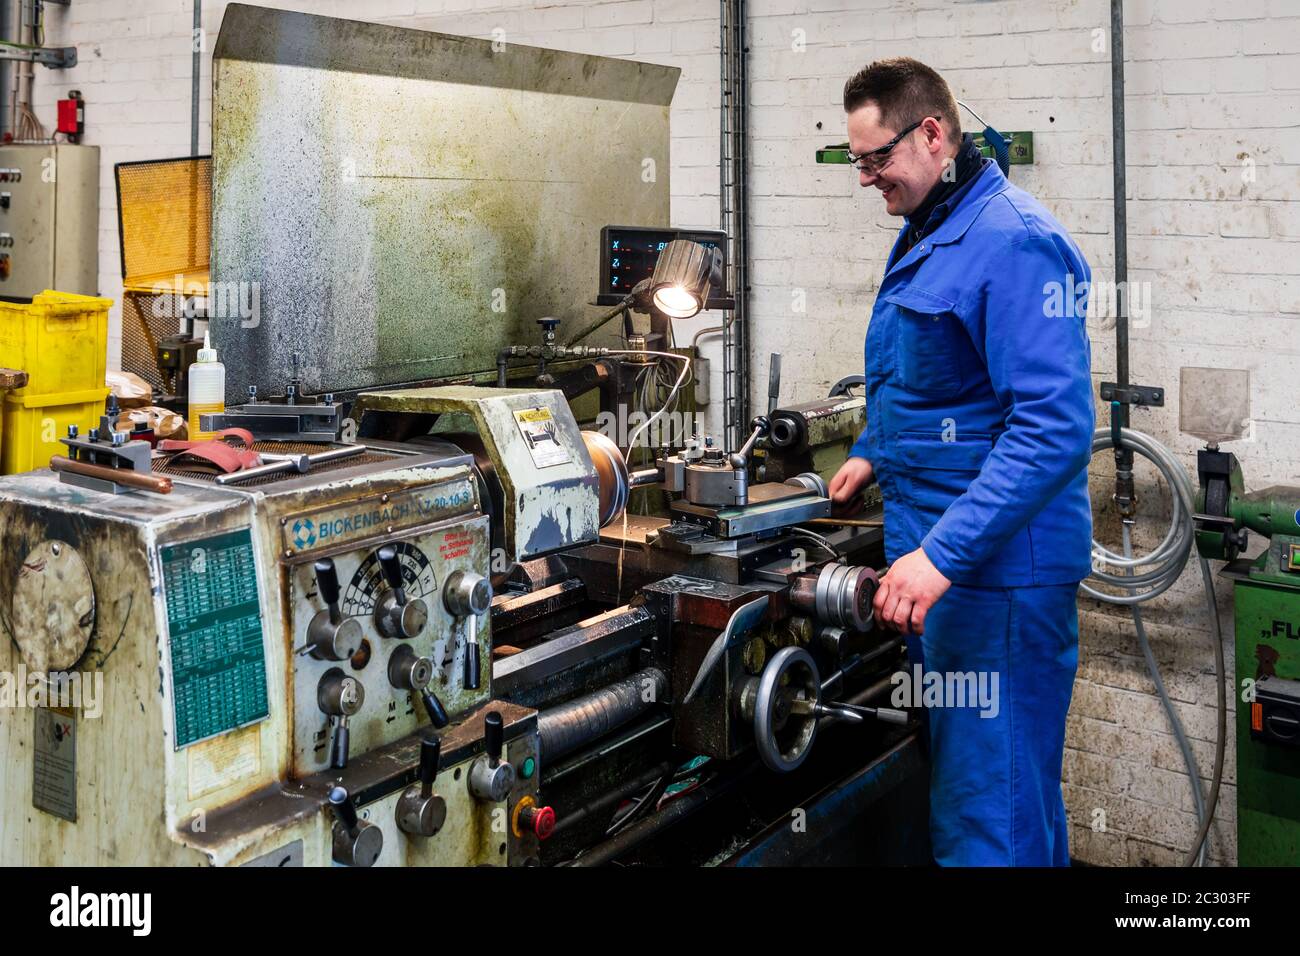 A worker in blue overall is working at a lathe machine Stock Photo